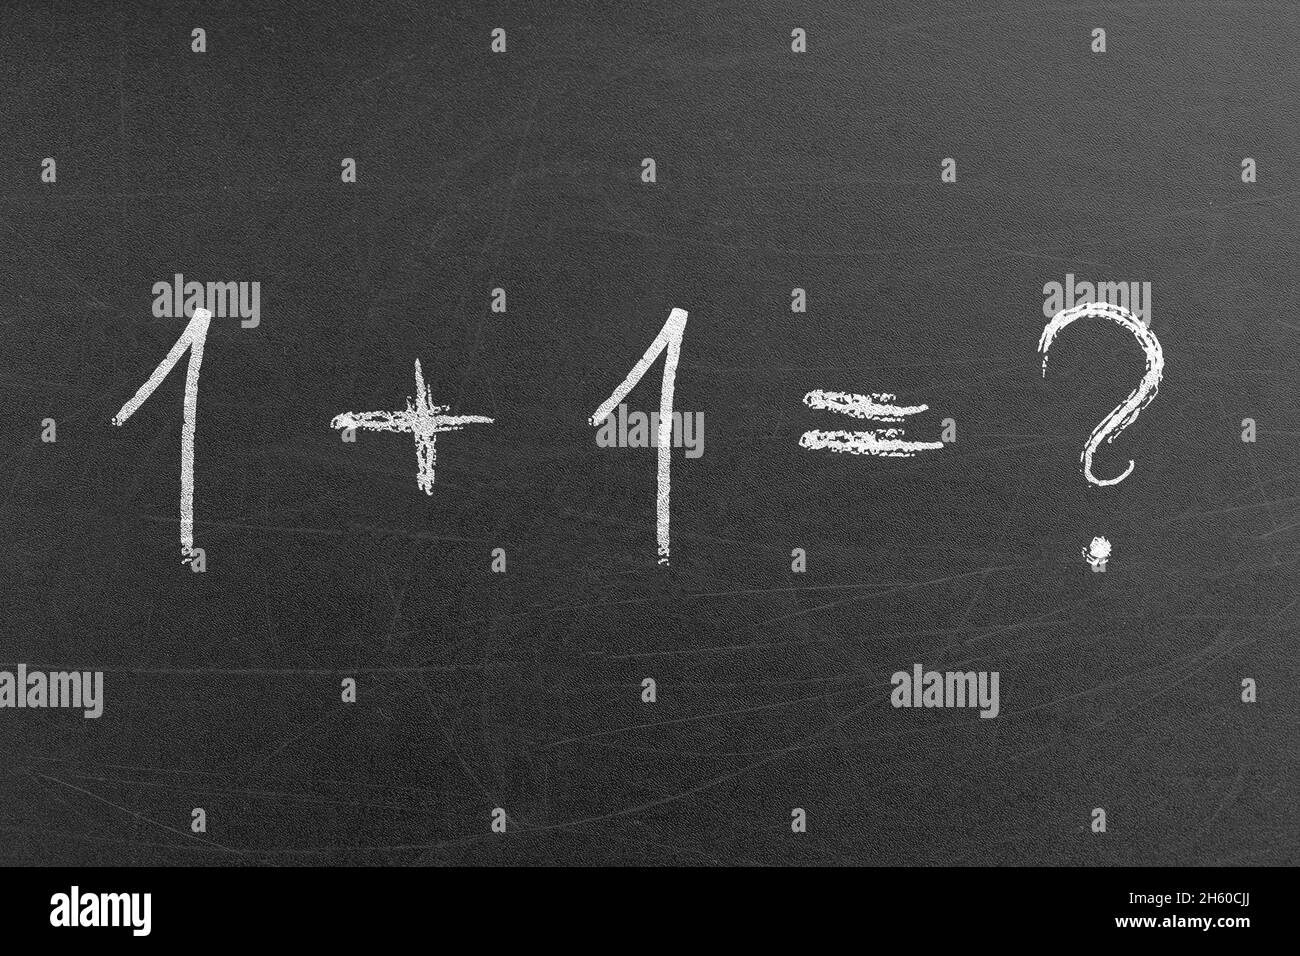 1 plus 1 math equation formula with a question mark on a chalkboard. School and education concepts and backgrounds Stock Photo